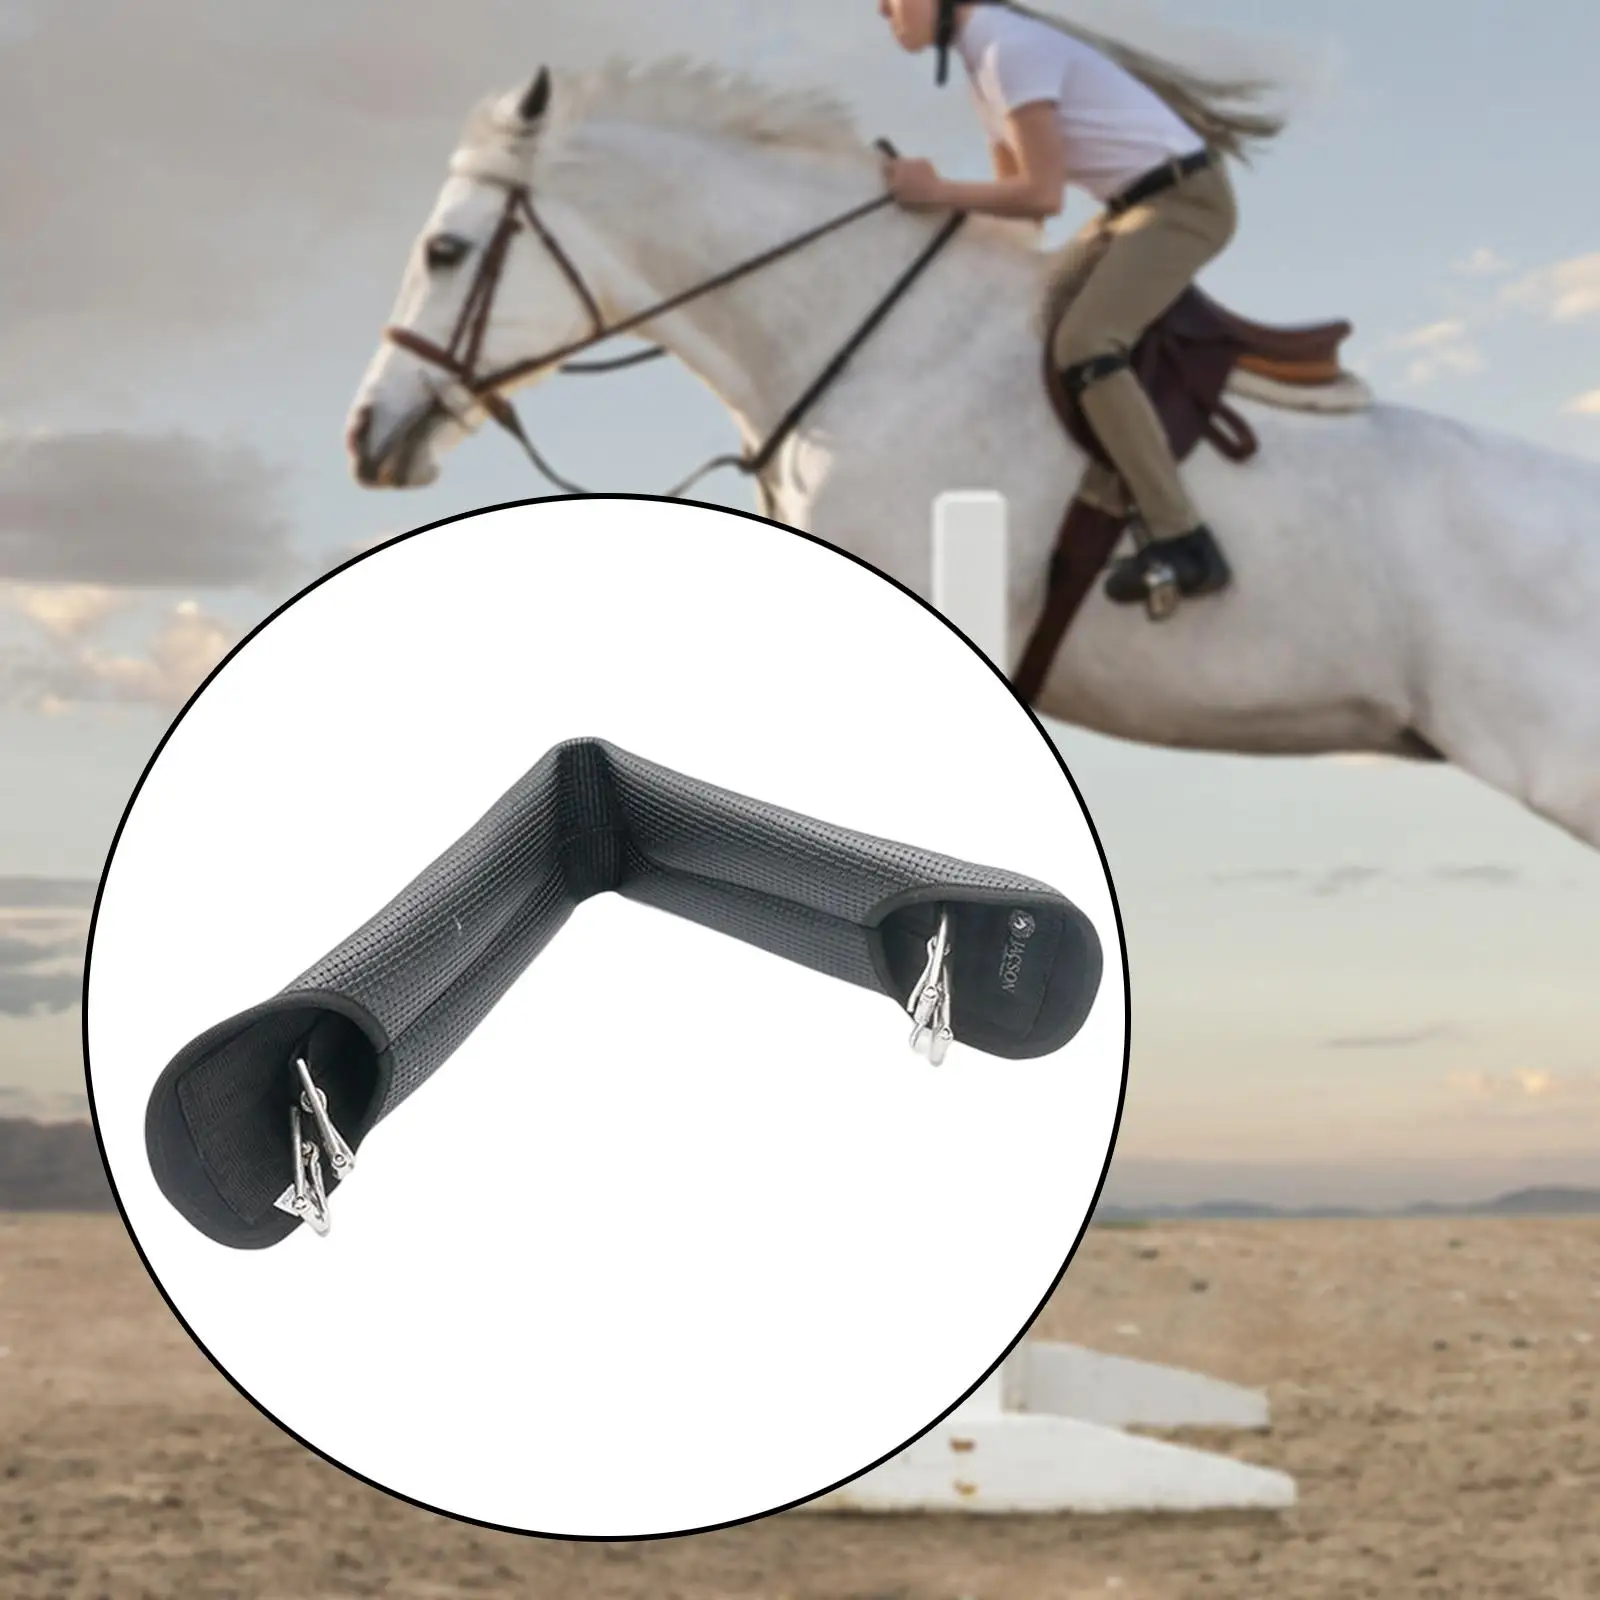 Horses Riding Belly Belt Equestrian Safety Equipment Portable for Horse Training